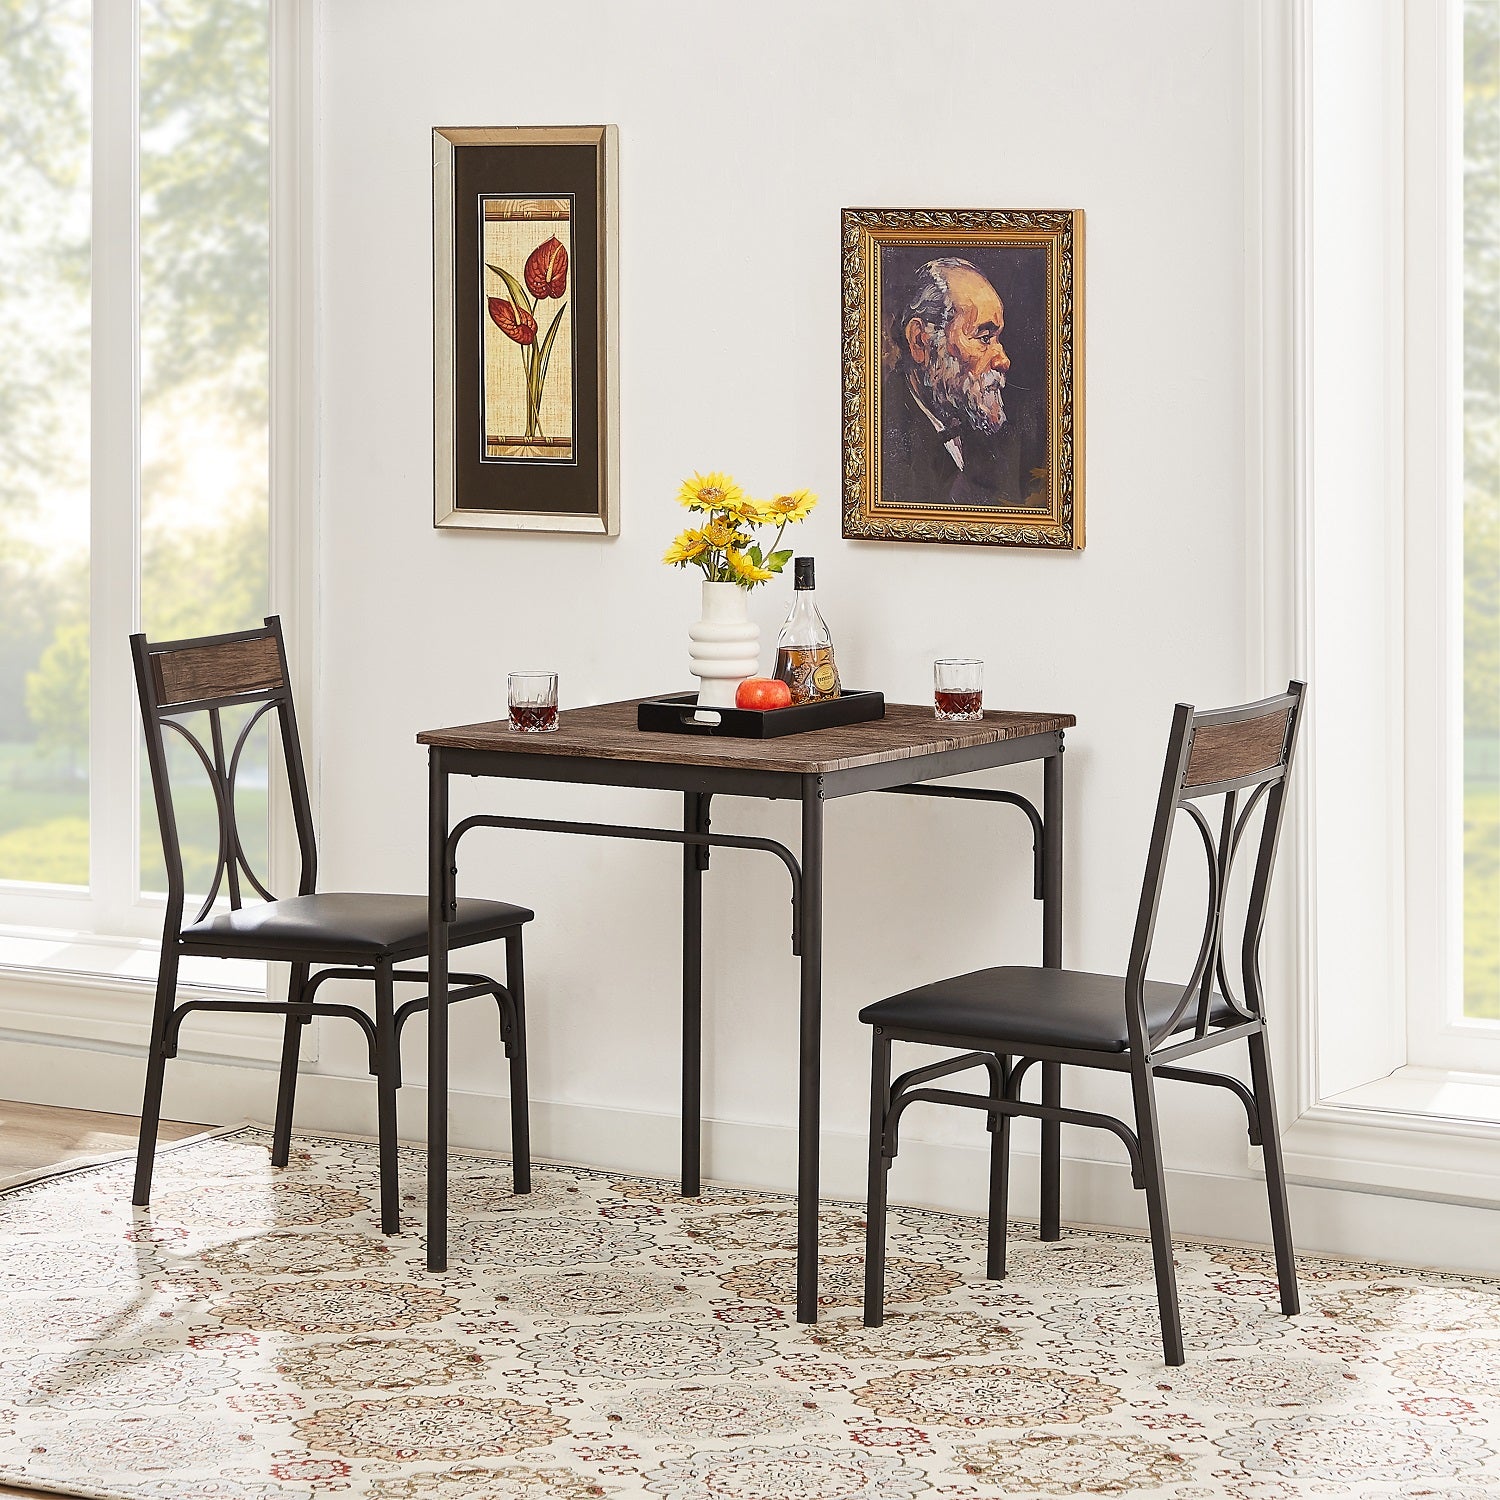 VECELO Industrial Style 3-Piece Dining Room Table Set with 2 PU Padded Chairs, Dark Brown